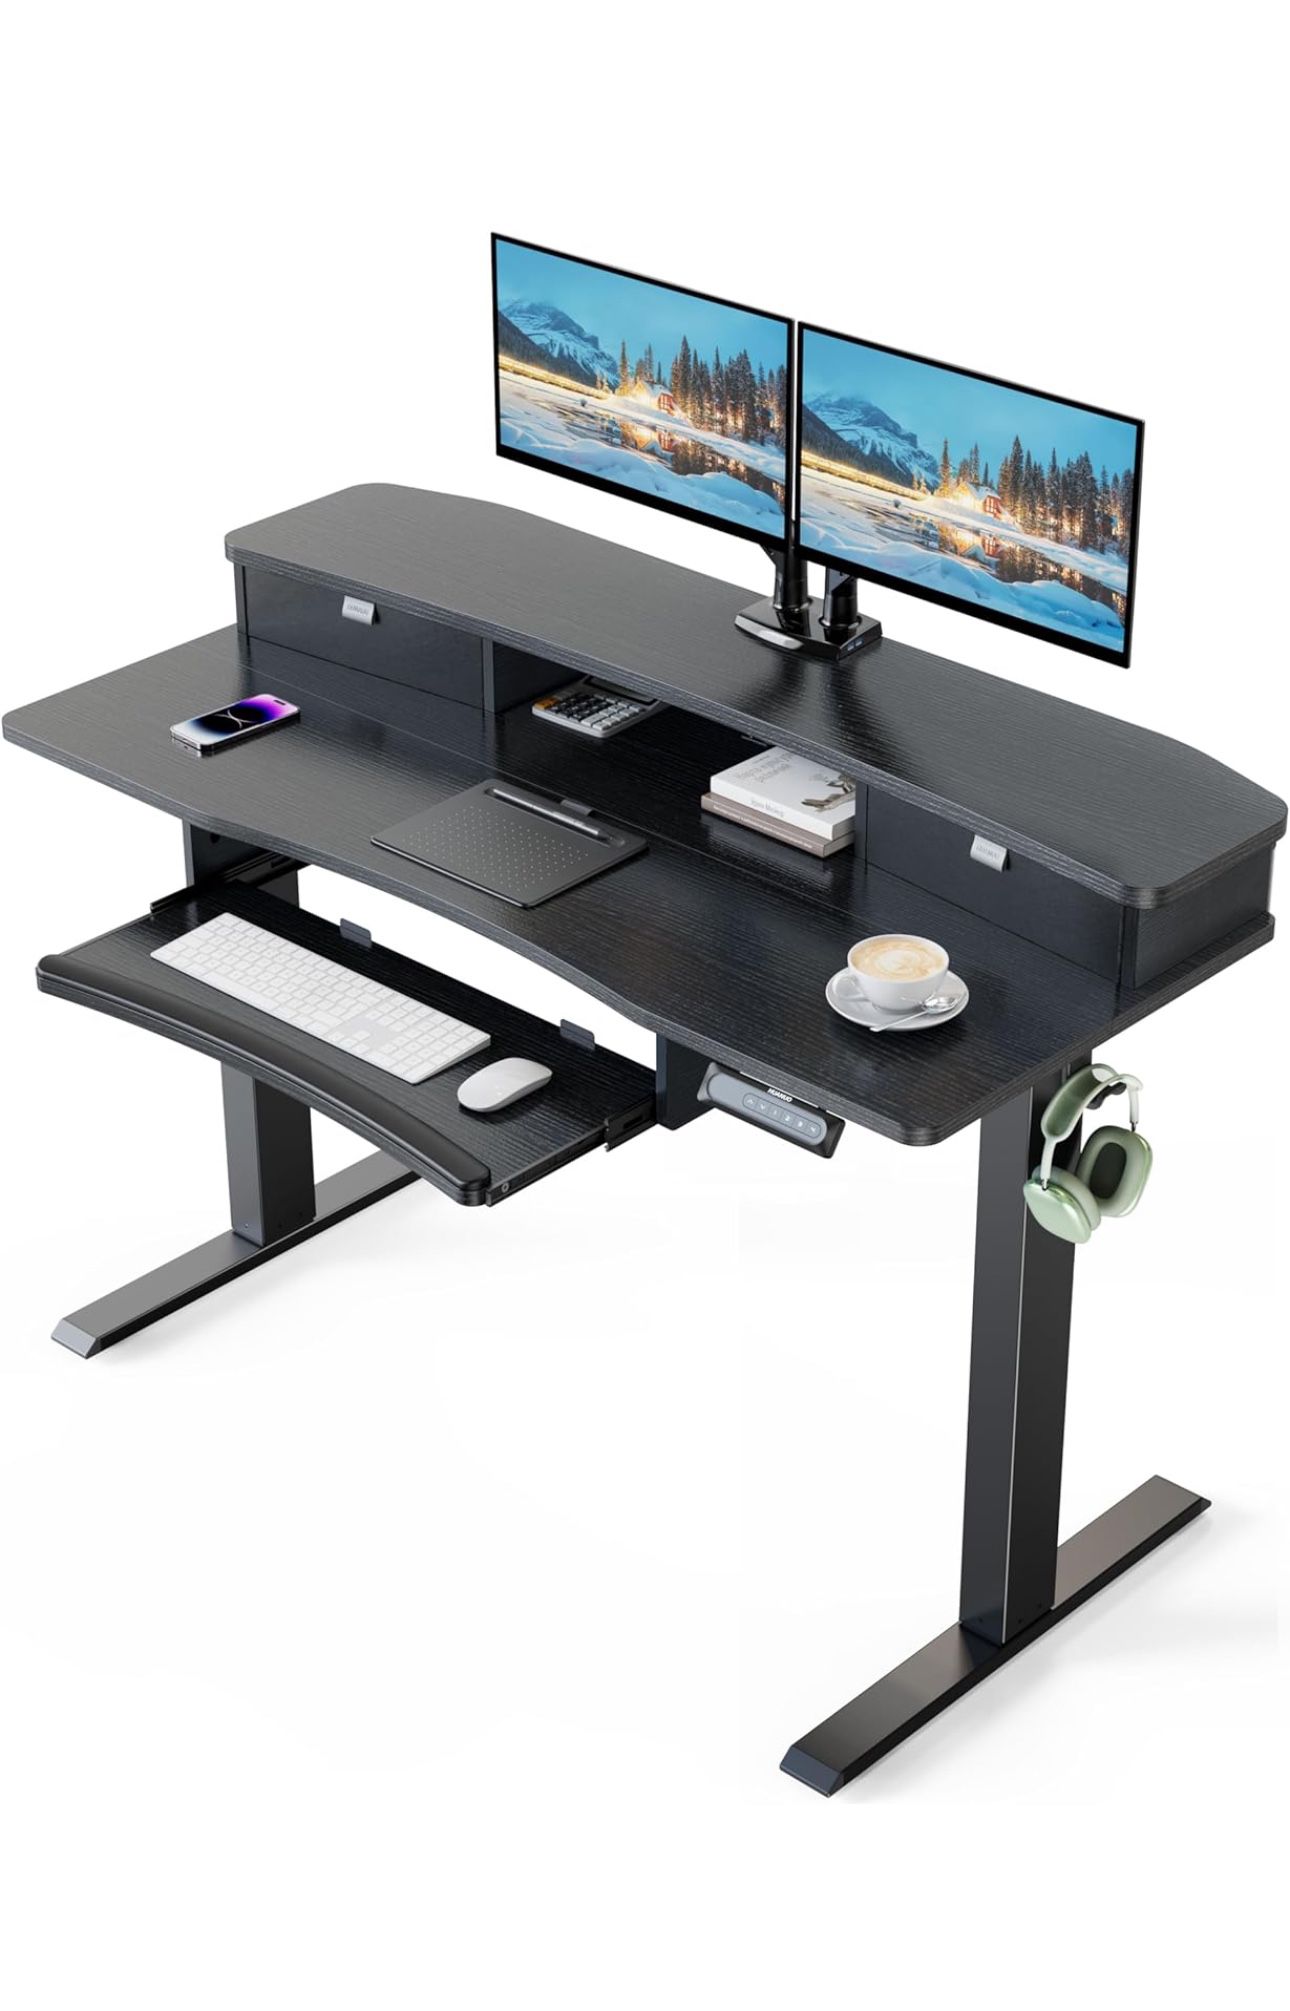 Brand New 48" x 26" Electric Standing Desk with 2 Drawers & 26.7" Large Keyboard Tray, C-Clamp Mount Compatible, Adjustable Computer Desk for Home Off